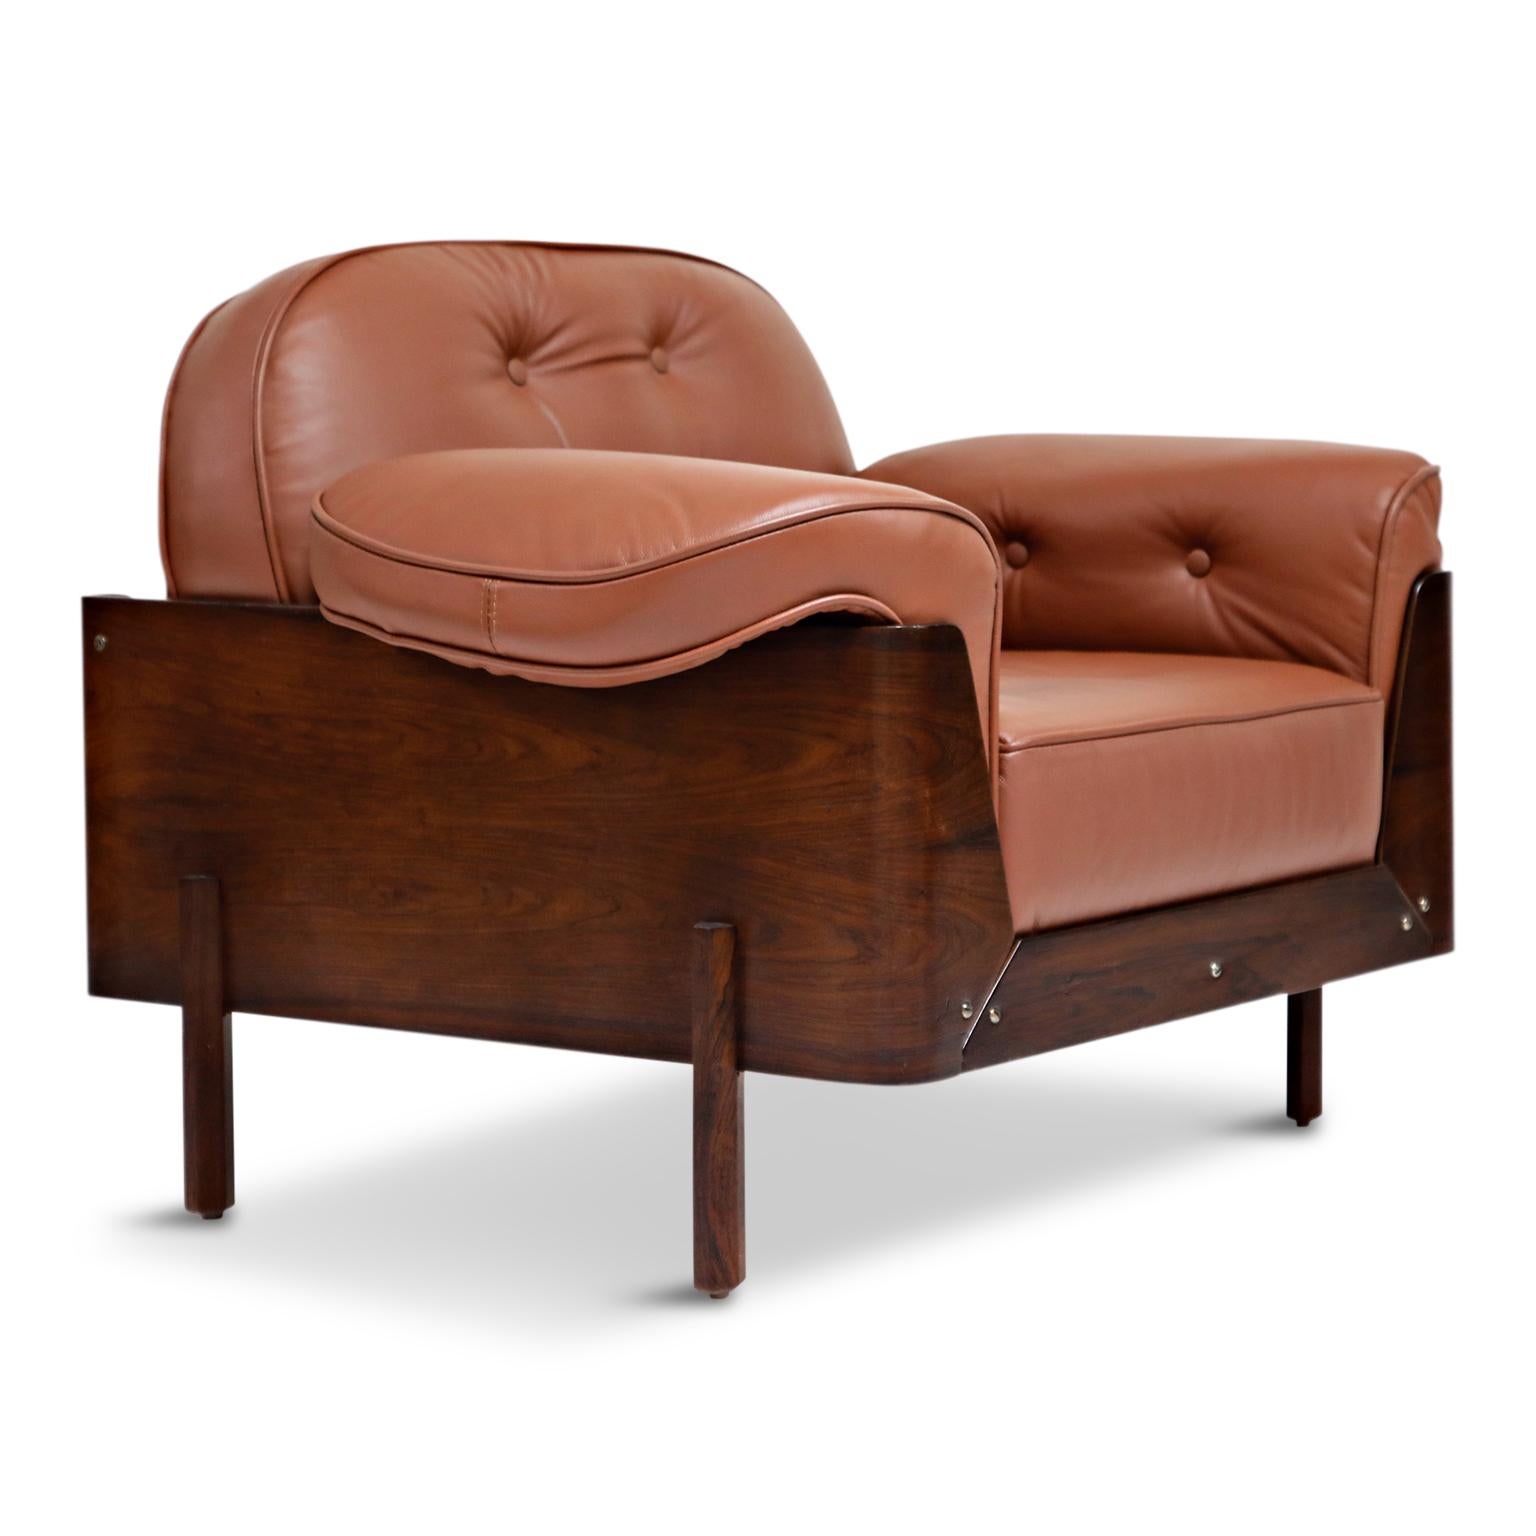 Mid-20th Century J.D. Moveis e Decoracoes Brazilian Rosewood and Leather Lounge Chairs, 1960s